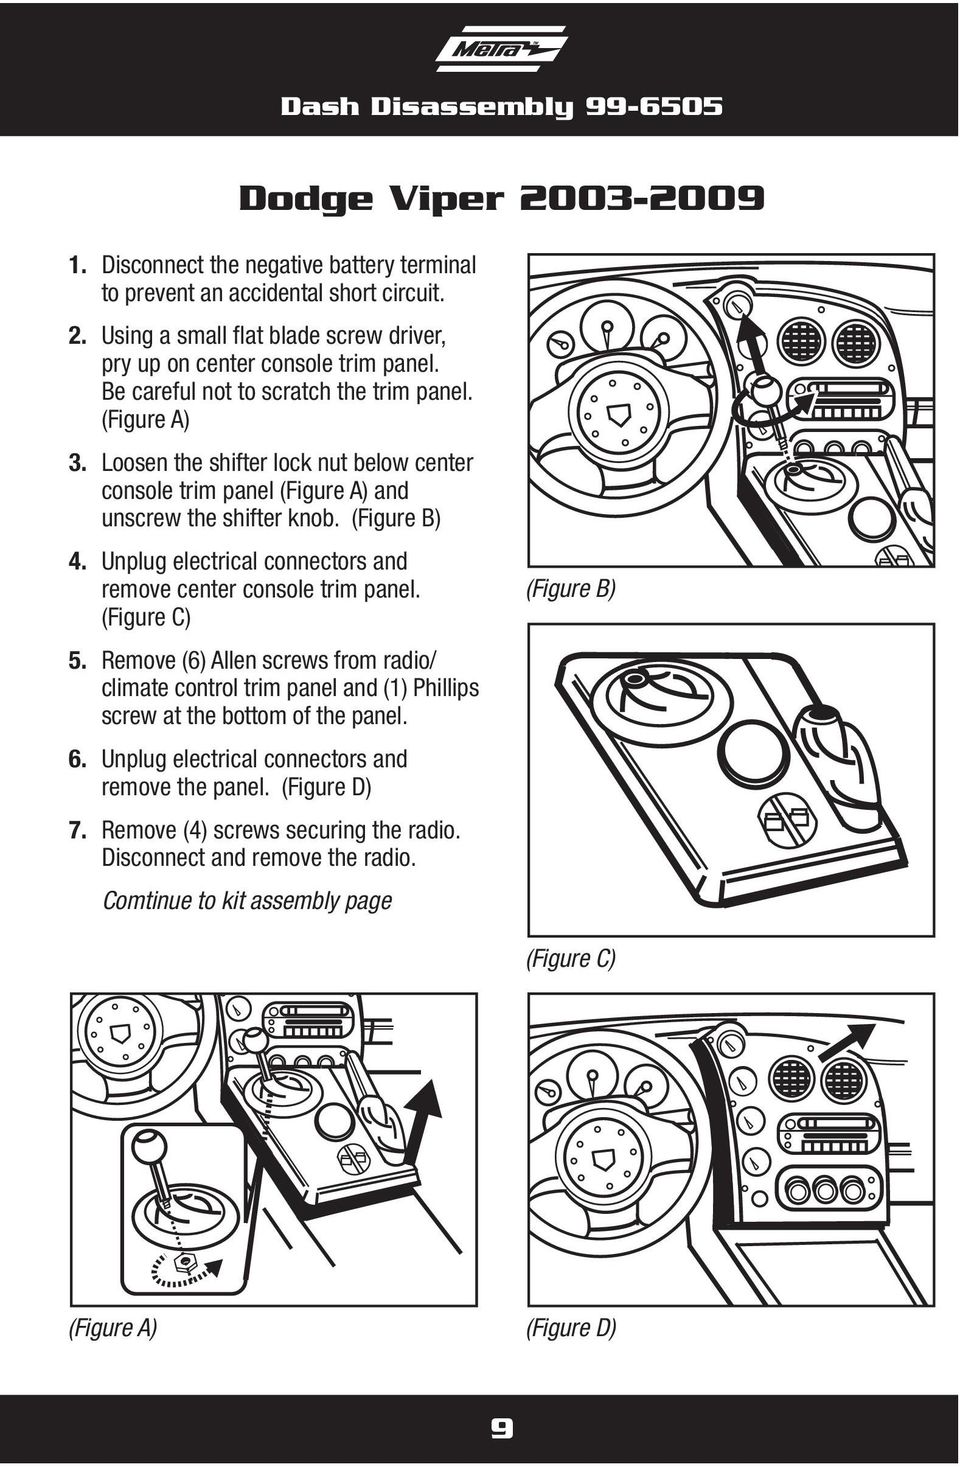 Unplug electrical connectors and remove center console trim panel. (Figure C) 5. Remove (6) Allen screws from radio/ climate control trim panel and (1) Phillips screw at the bottom of the panel. 6.